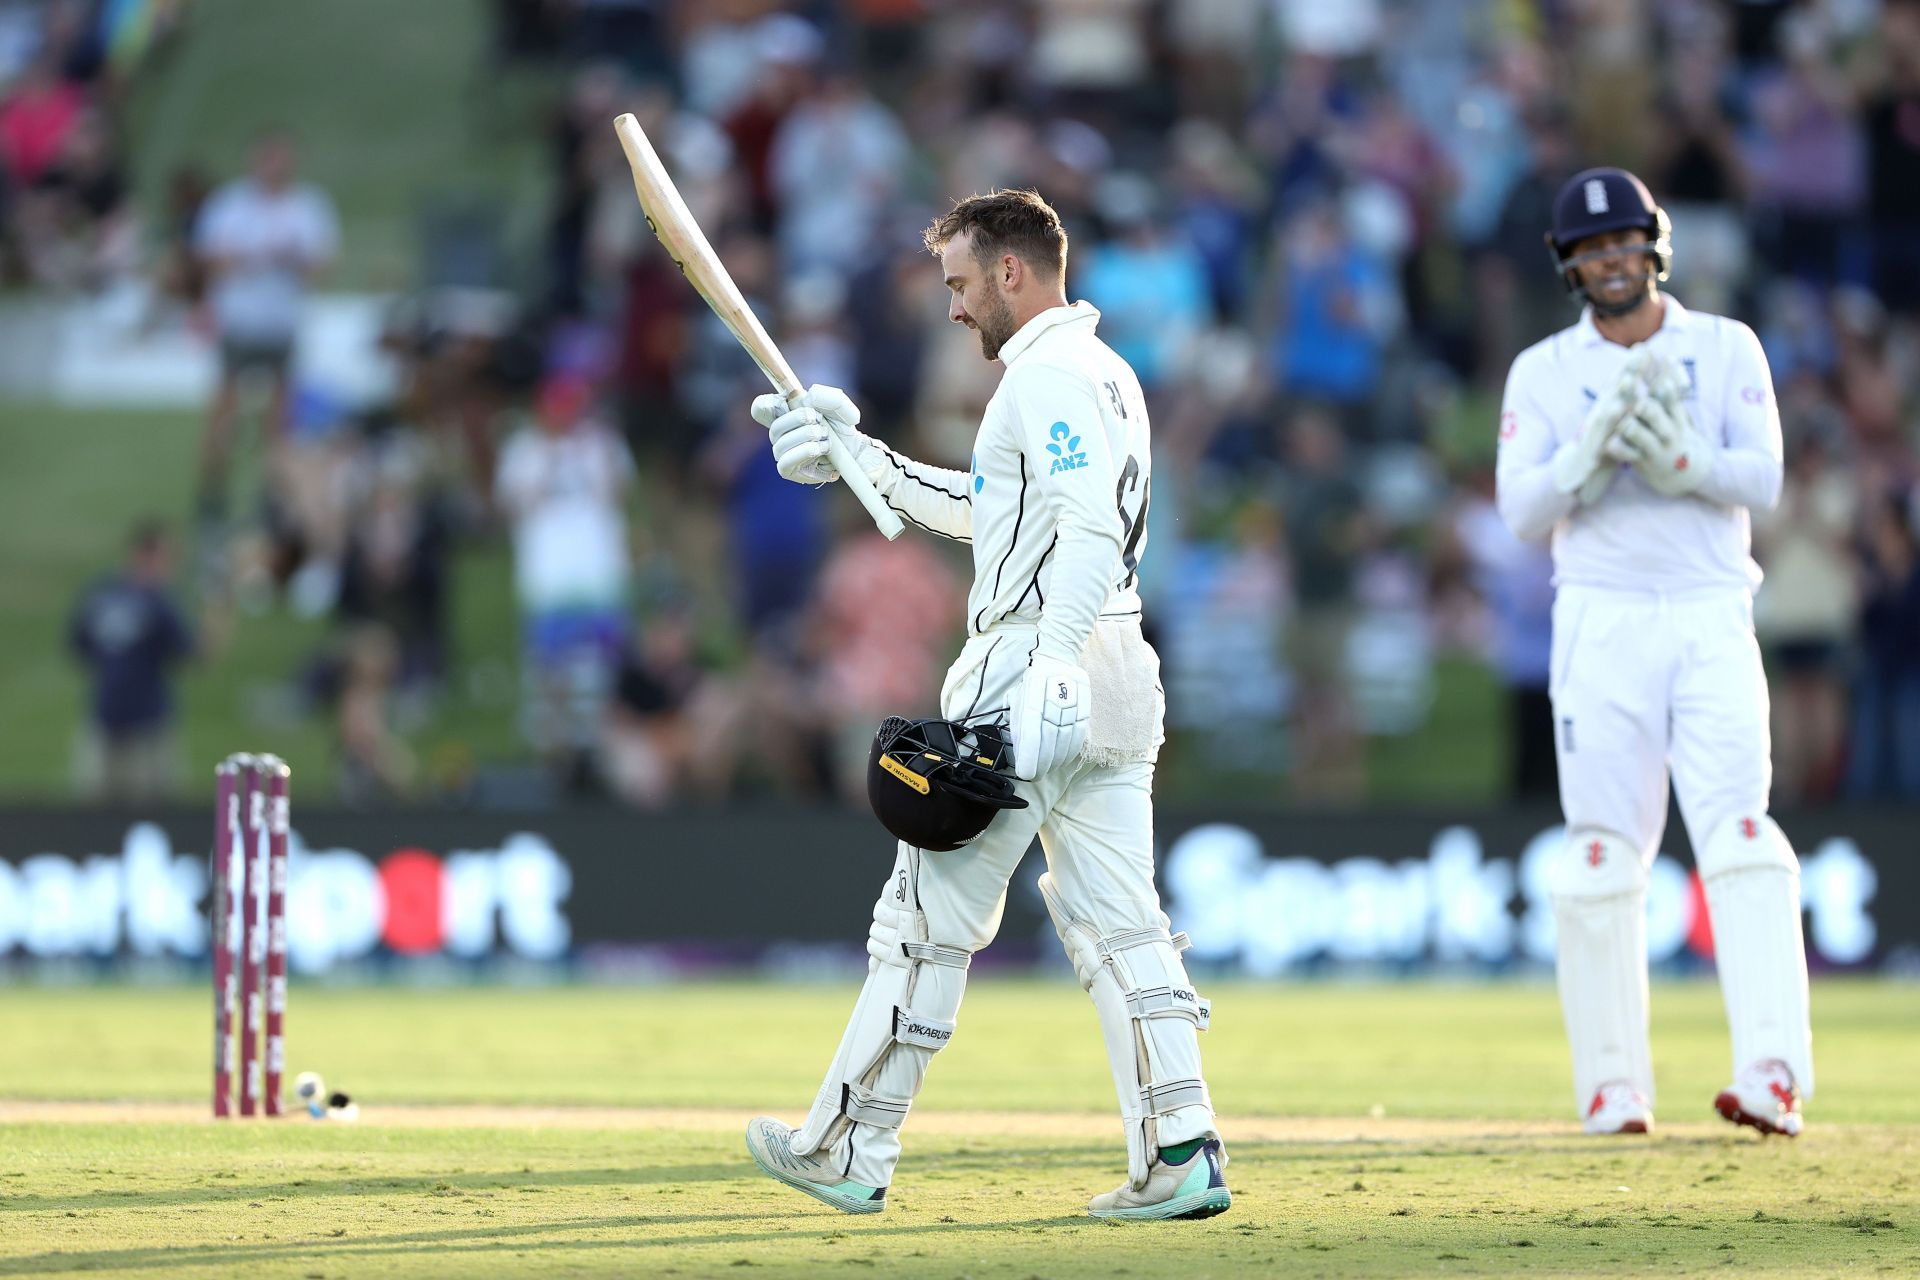 New Zealand v England - 1st Test: Day 2 (Image: Getty)